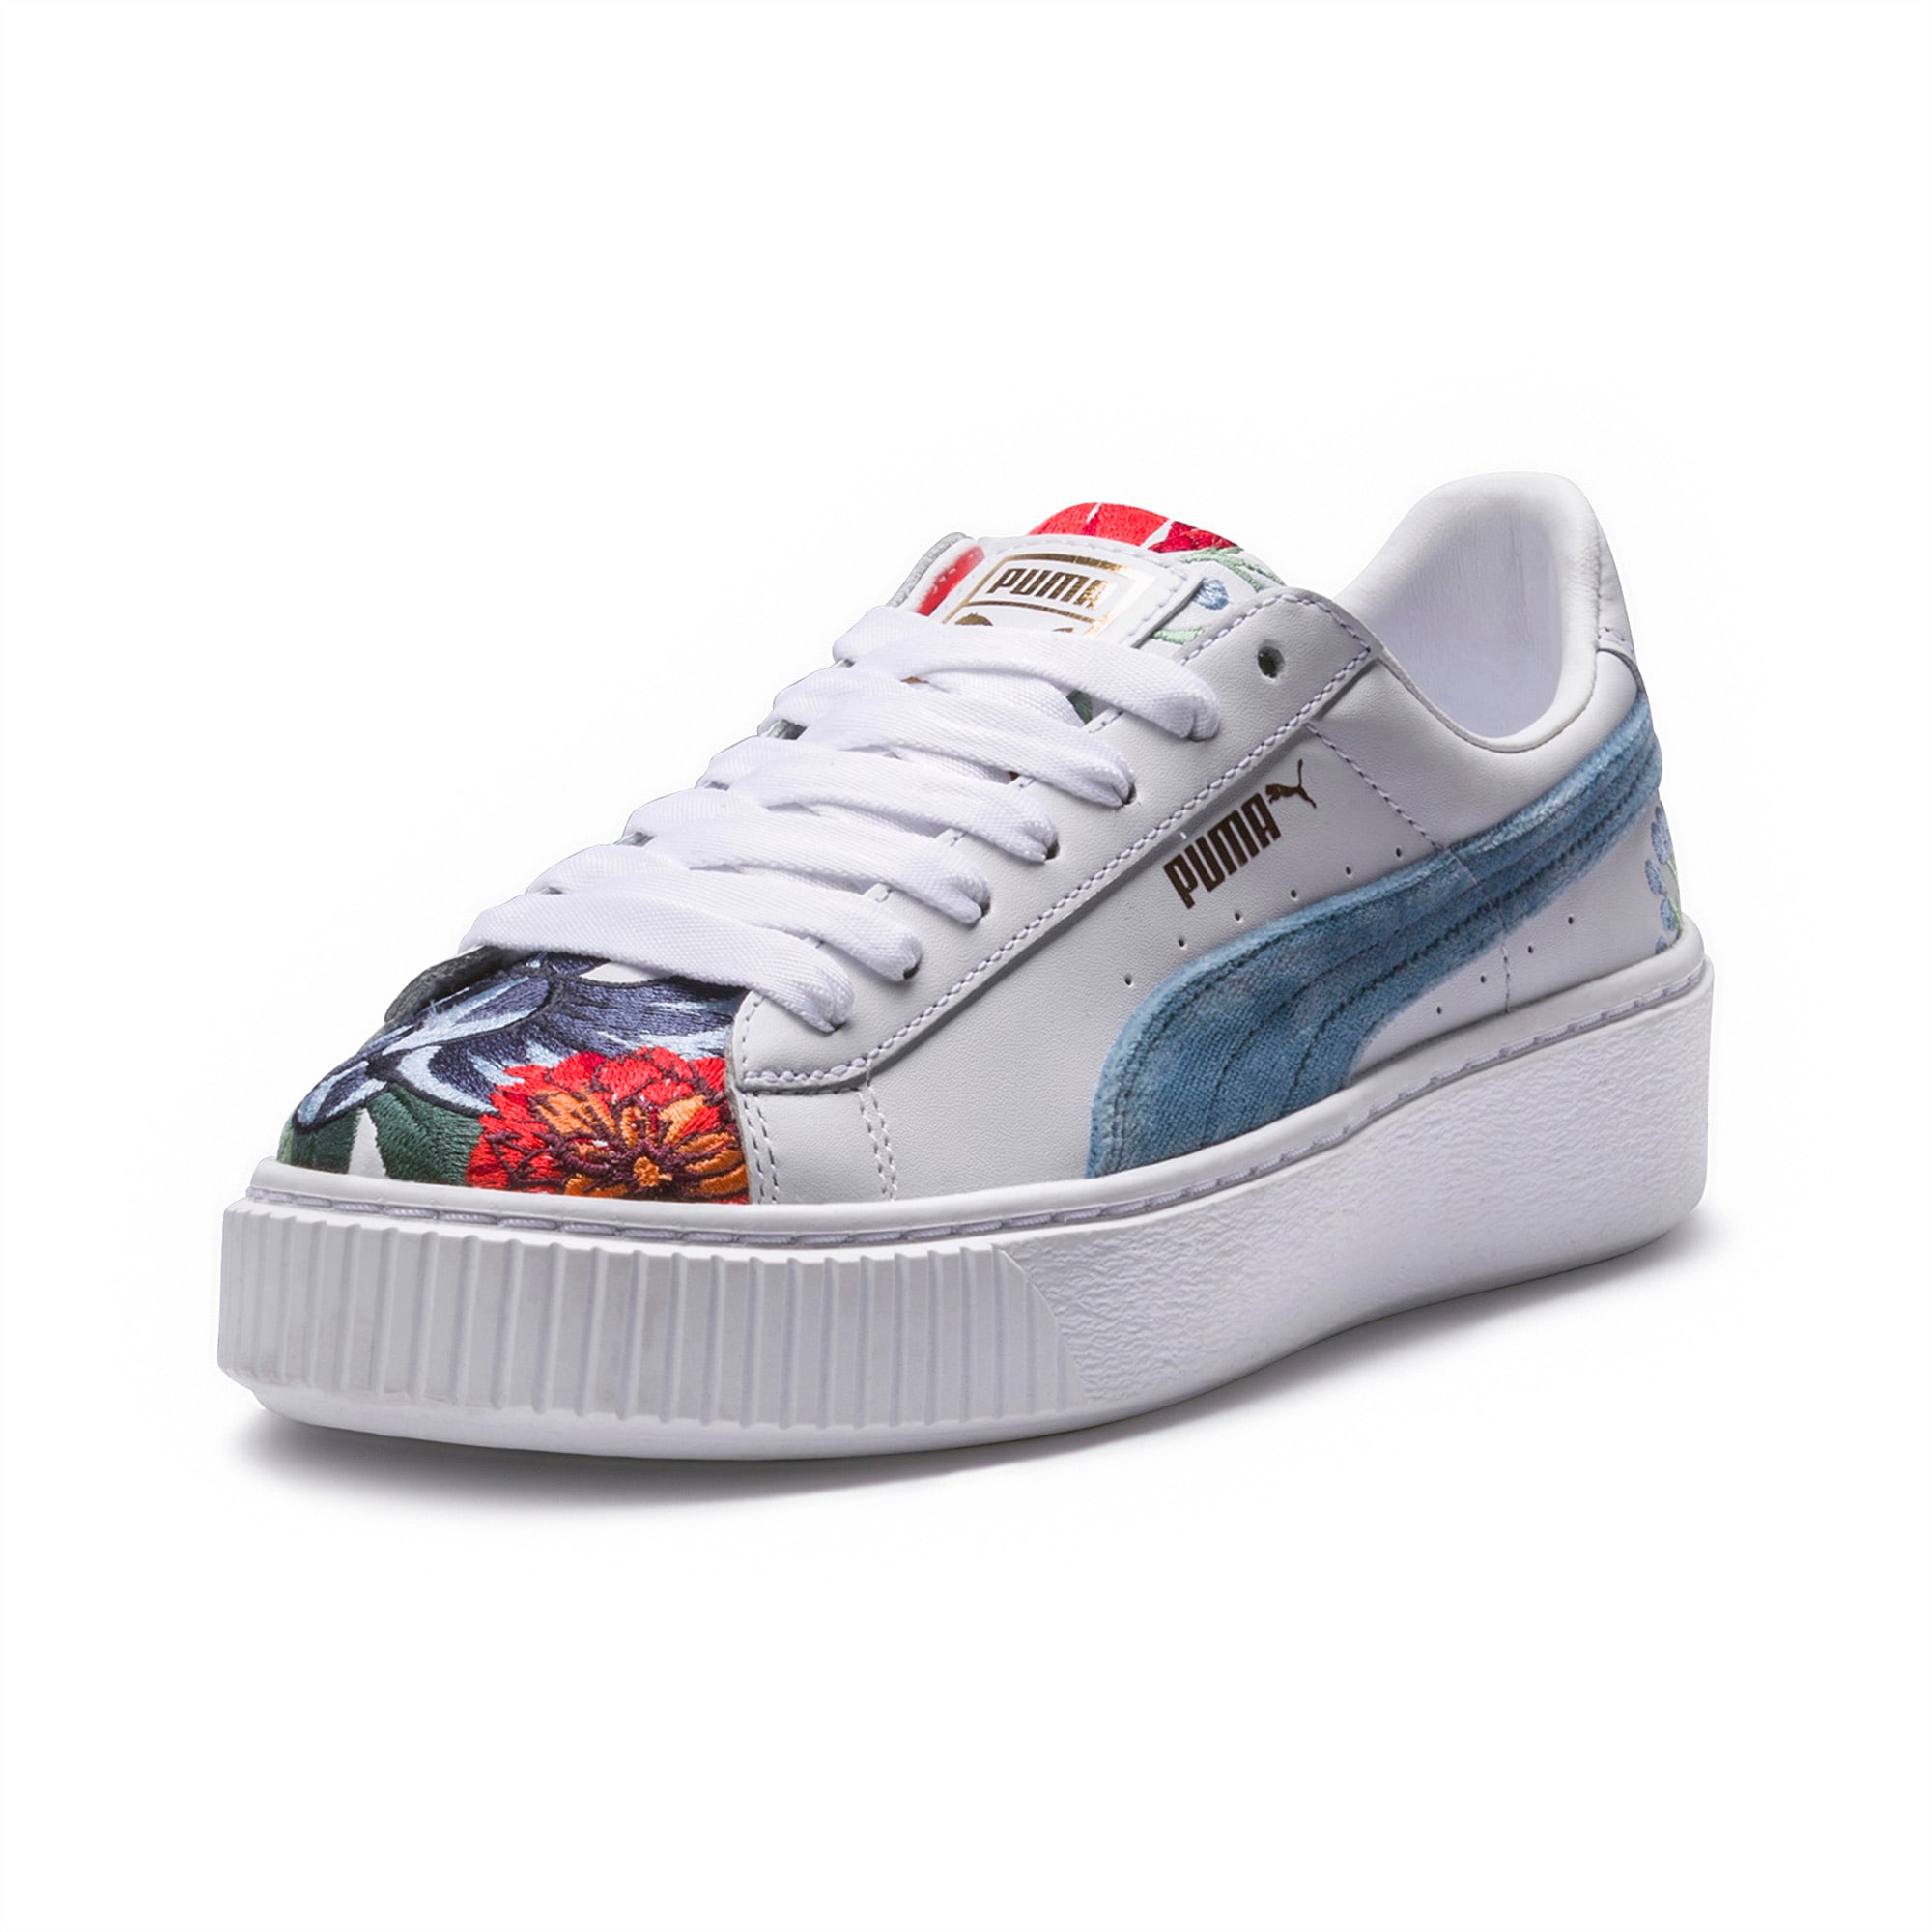 puma shoes with flowers